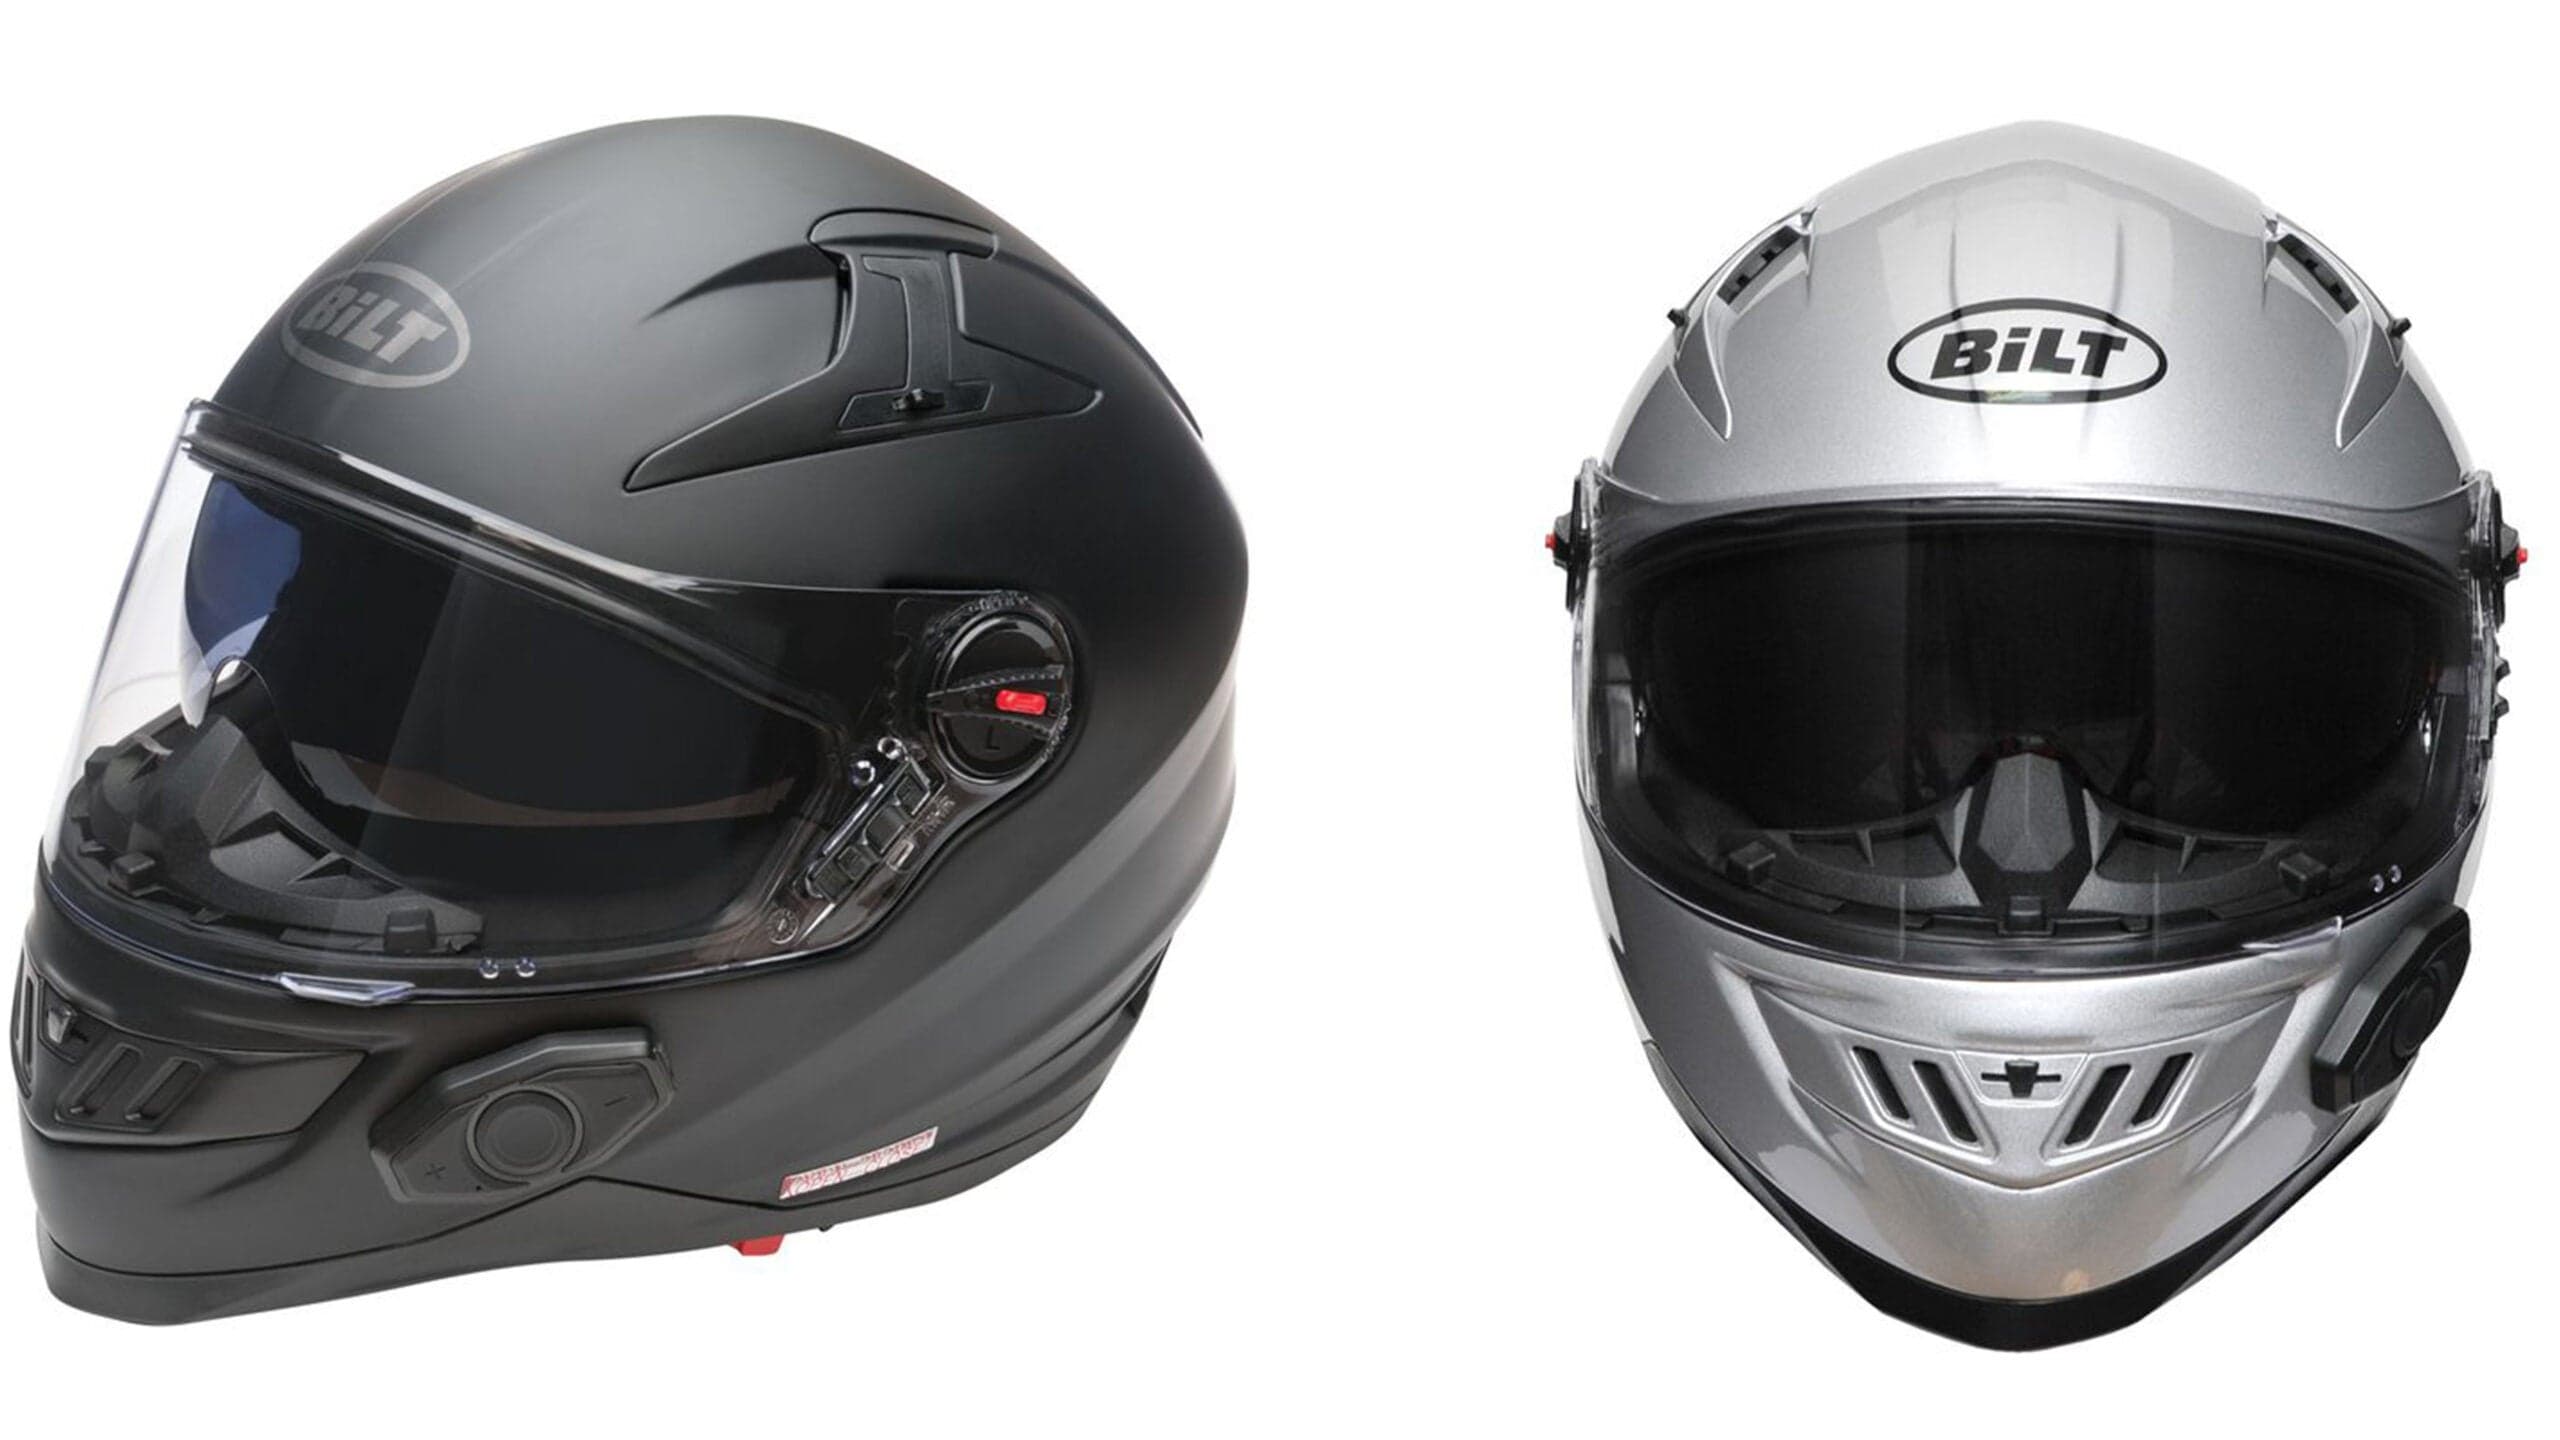 Spotlight Deal: Save $60 on this BiLT Techno 2.0 Motorcycle Helmet with Built-in Bluetooth